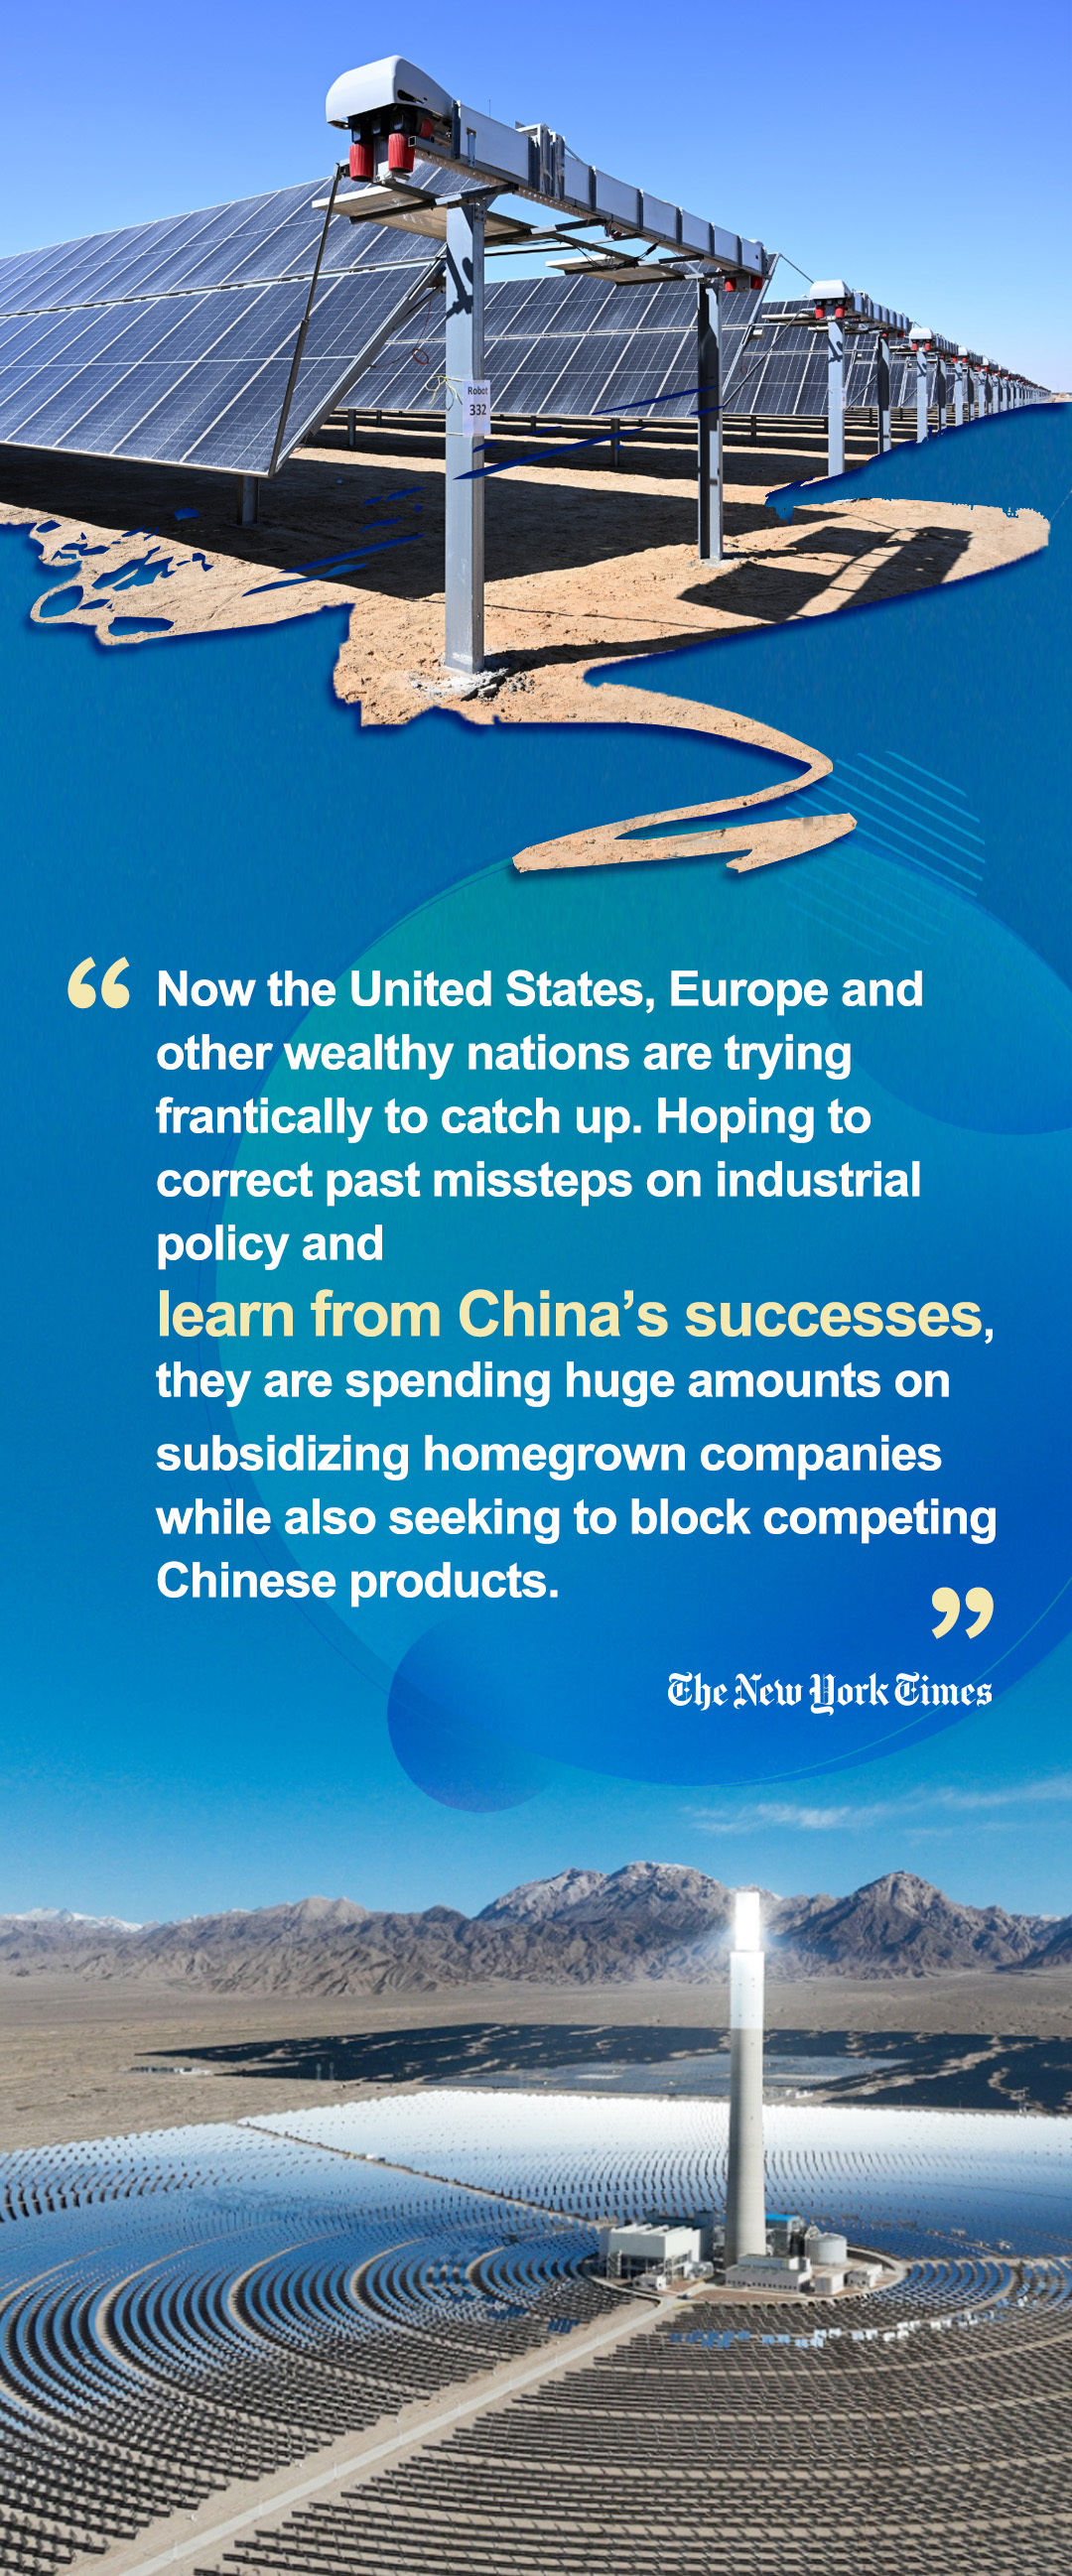 NYT: West learns from China's successes on new energy